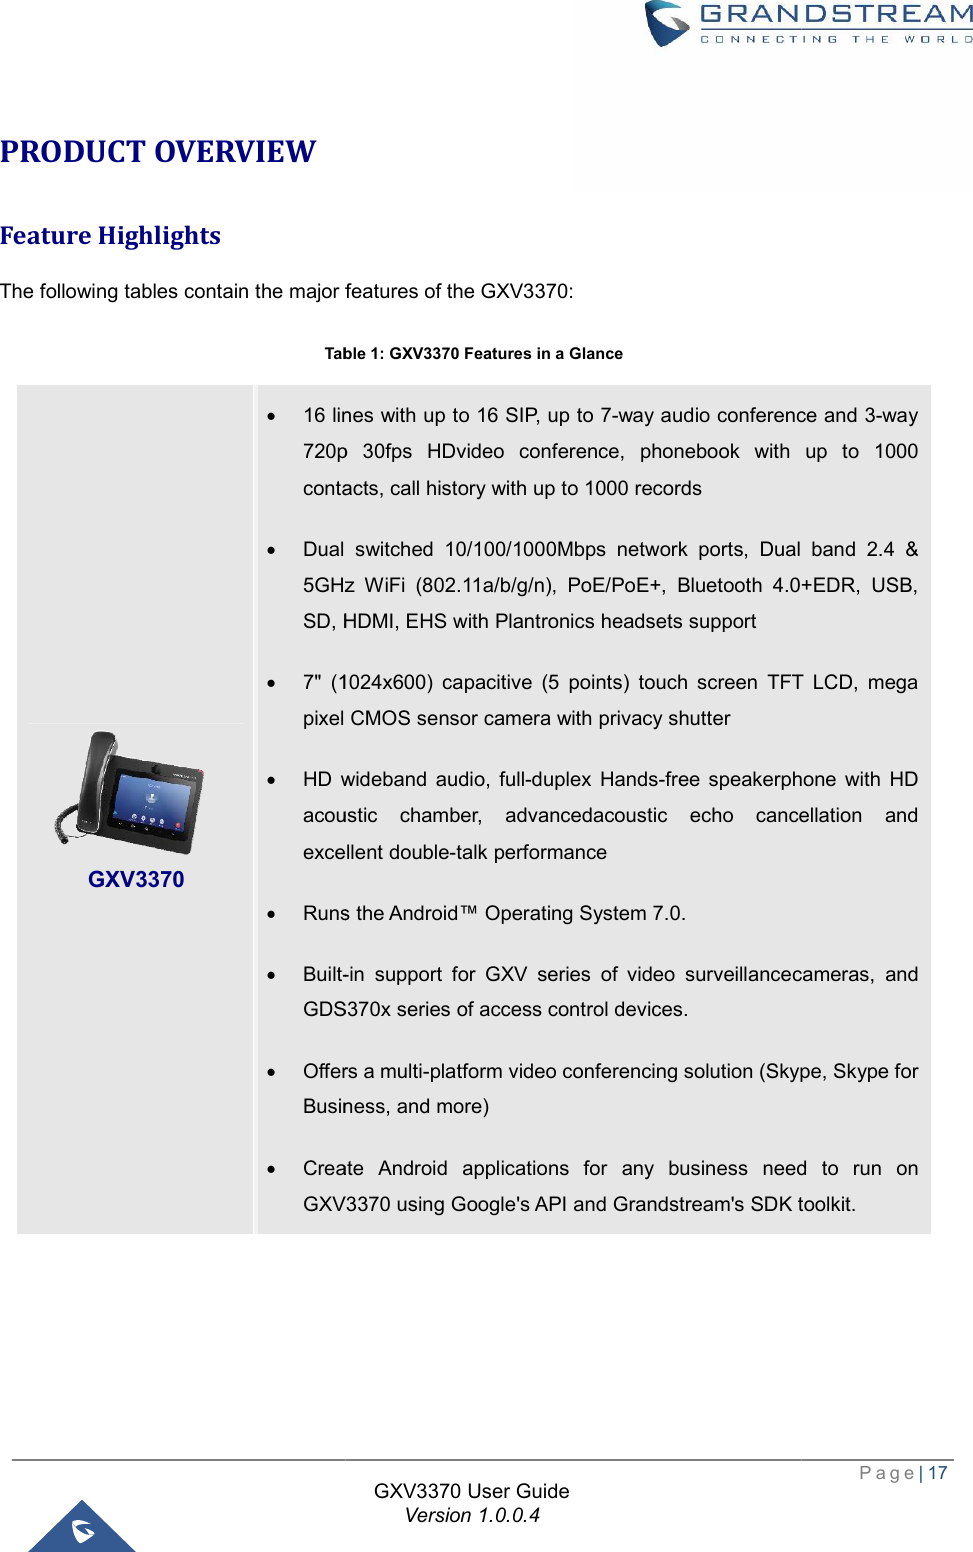  PRODUCT OVERVIEW Feature Highlights The following tables contain the major features of the  Table     GXV3370  · 16 lines with up to 16 SIP, up to 7720p 30fps HDcontacts, call history with up to 1000 records· Dual switched 10/100/1000Mbps network ports, 5GHz SD, HDMI, EHS with Plantronics headsets sup· 7&quot; (1024x600pixel CMOS sensor camera with privacy shutter· HD wideband audio, acoustic chamber, advancedacoustic echo cancellation and excellent double· Runs the· Built-GDS370x series of access control devices.· Offers a multiBusiness, and more)· Create GXV3370GXV3370 User Guide Version 1.0.0.4  The following tables contain the major features of the GXV3370: Table 1: GXV3370 Features in a Glance   16 lines with up to 16 SIP, up to 7-way audio conference and 3720p 30fps HDvideo conference, phonebook with up to 1000 contacts, call history with up to 1000 records Dual switched 10/100/1000Mbps network ports, Dual band 2.4 &amp; 5GHz WiFi (802.11a/b/g/n), PoE/PoE+, Bluetooth 4.0+EDRSD, HDMI, EHS with Plantronics headsets support 7&quot; (1024x600) capacitive (5 points) touch screen TFT LCD, mega pixel CMOS sensor camera with privacy shutter HD wideband audio, full-duplex Hands-free speakerphone with HD acoustic chamber, advancedacoustic echo cancellation and excellent double-talk performance Runs the Android™ Operating System 7.0. -in support for GXV series of video surveillancecameras, and GDS370x series of access control devices. Offers a multi-platform video conferencing solution (Skype, Skype for Business, and more) Create Android applications for any business need to run on GXV3370 using Google&apos;s API and Grandstream&apos;s SDK toolkit Page| 17 way audio conference and 3-way video conference, phonebook with up to 1000 Dual band 2.4 &amp; 4.0+EDR, USB, ) capacitive (5 points) touch screen TFT LCD, mega free speakerphone with HD acoustic chamber, advancedacoustic echo cancellation and in support for GXV series of video surveillancecameras, and platform video conferencing solution (Skype, Skype for iness need to run on using Google&apos;s API and Grandstream&apos;s SDK toolkit. 